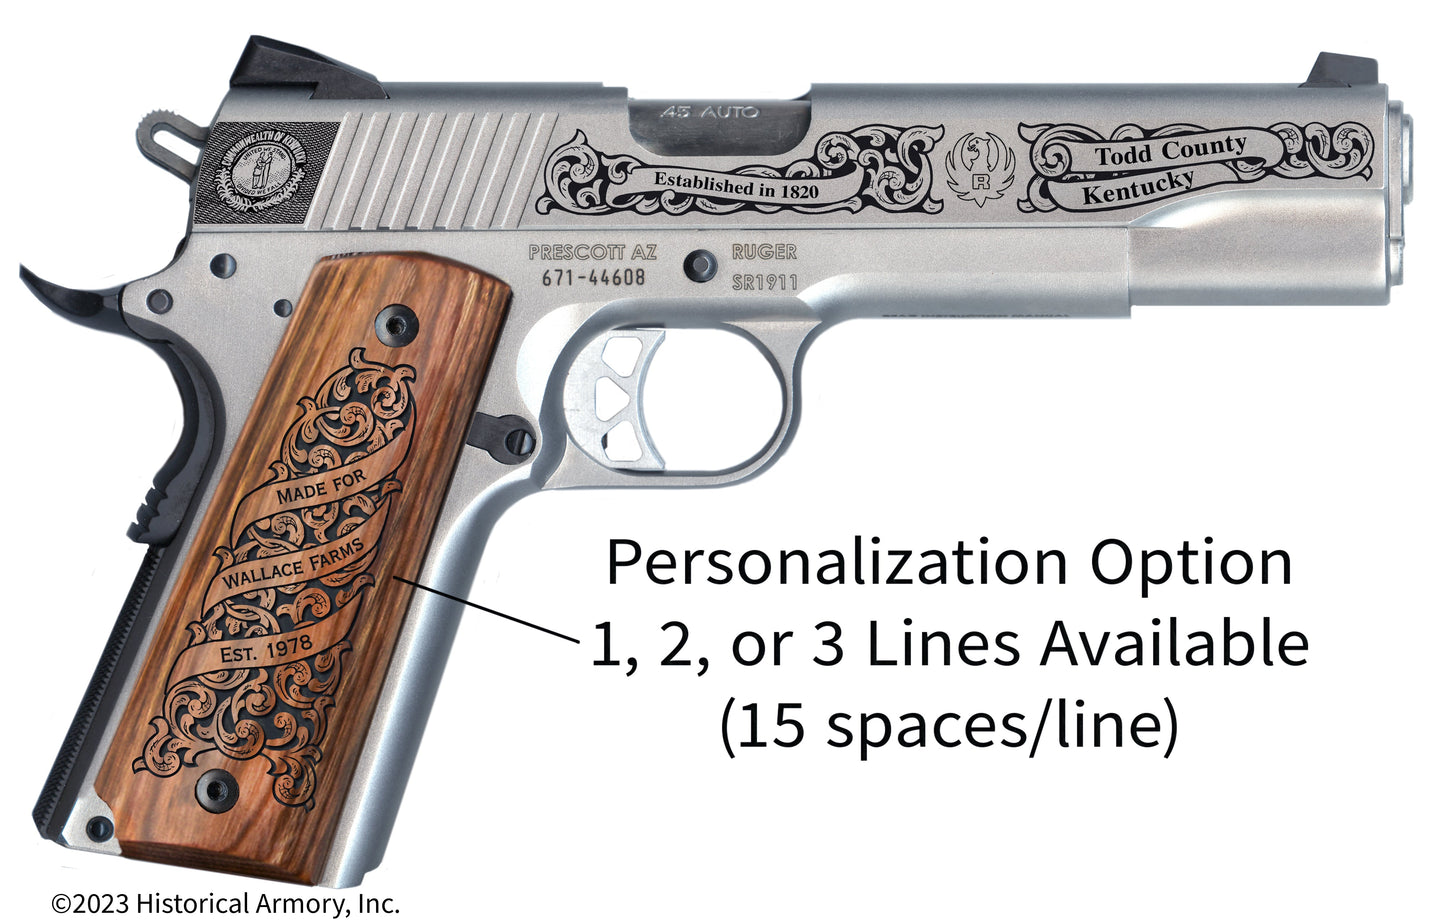 Todd County Kentucky Personalized Engraved .45 Auto Ruger 1911